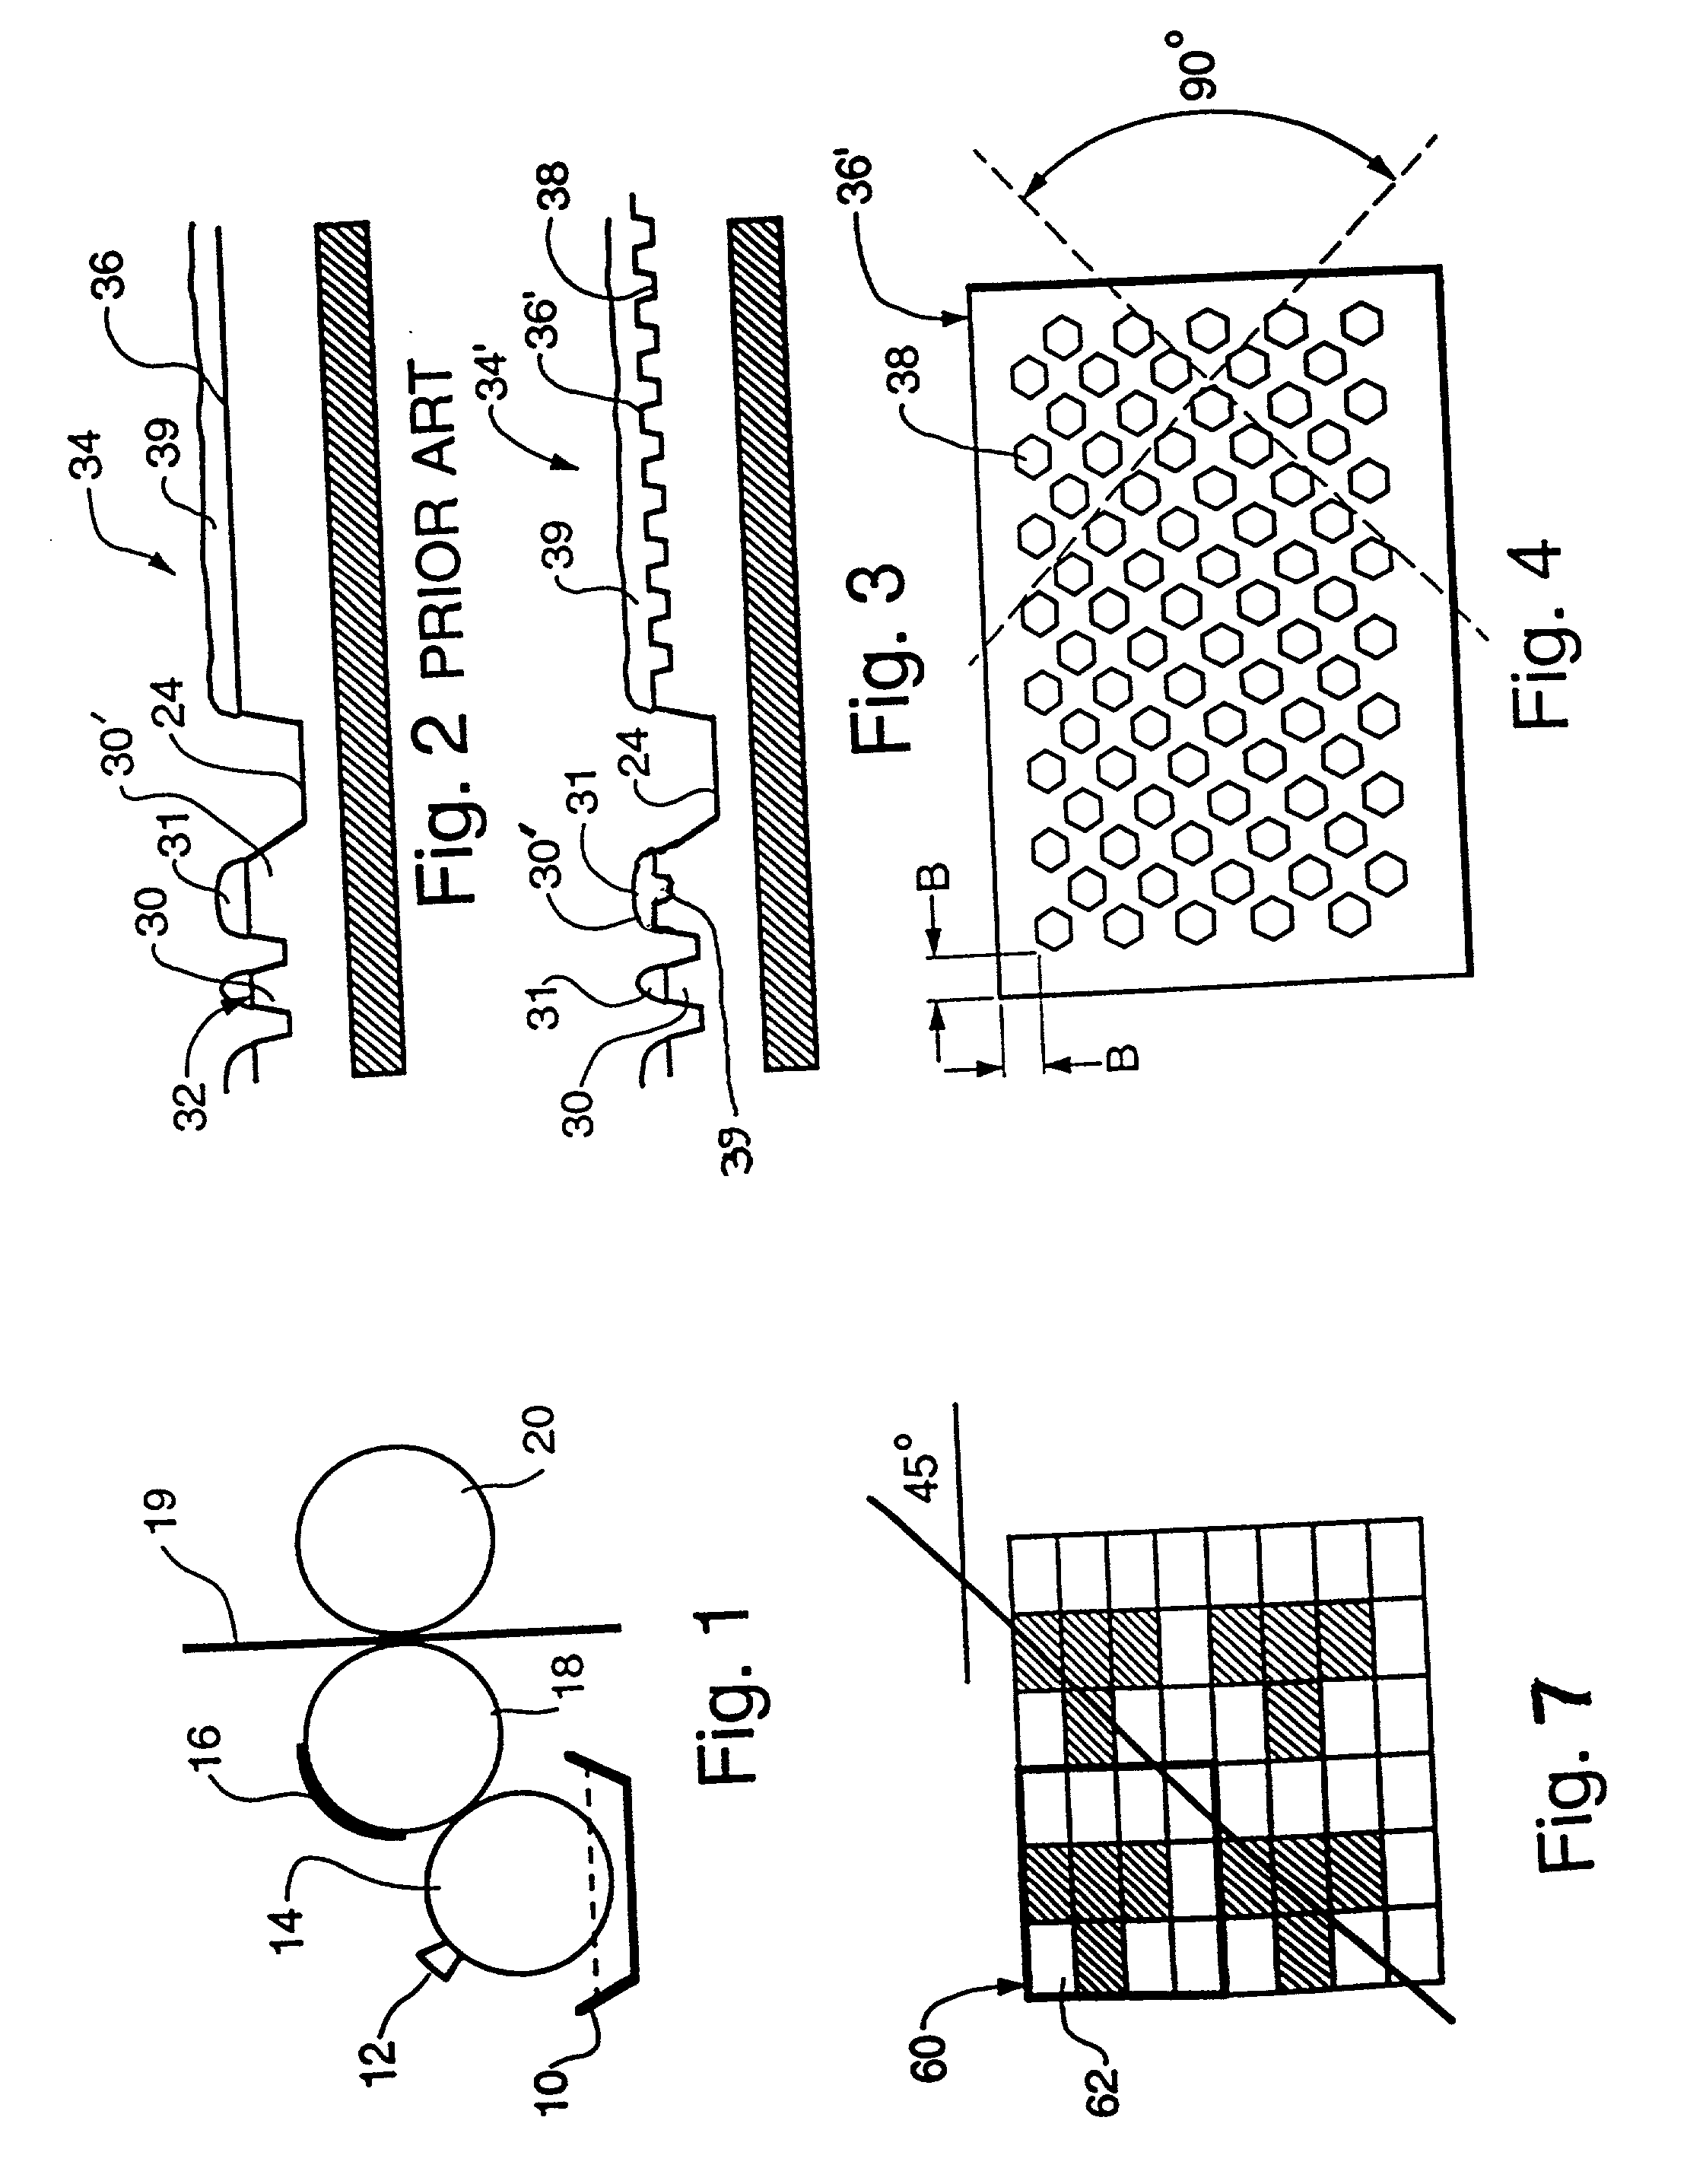 Printing plates containing ink cells in both solid and halftone areas